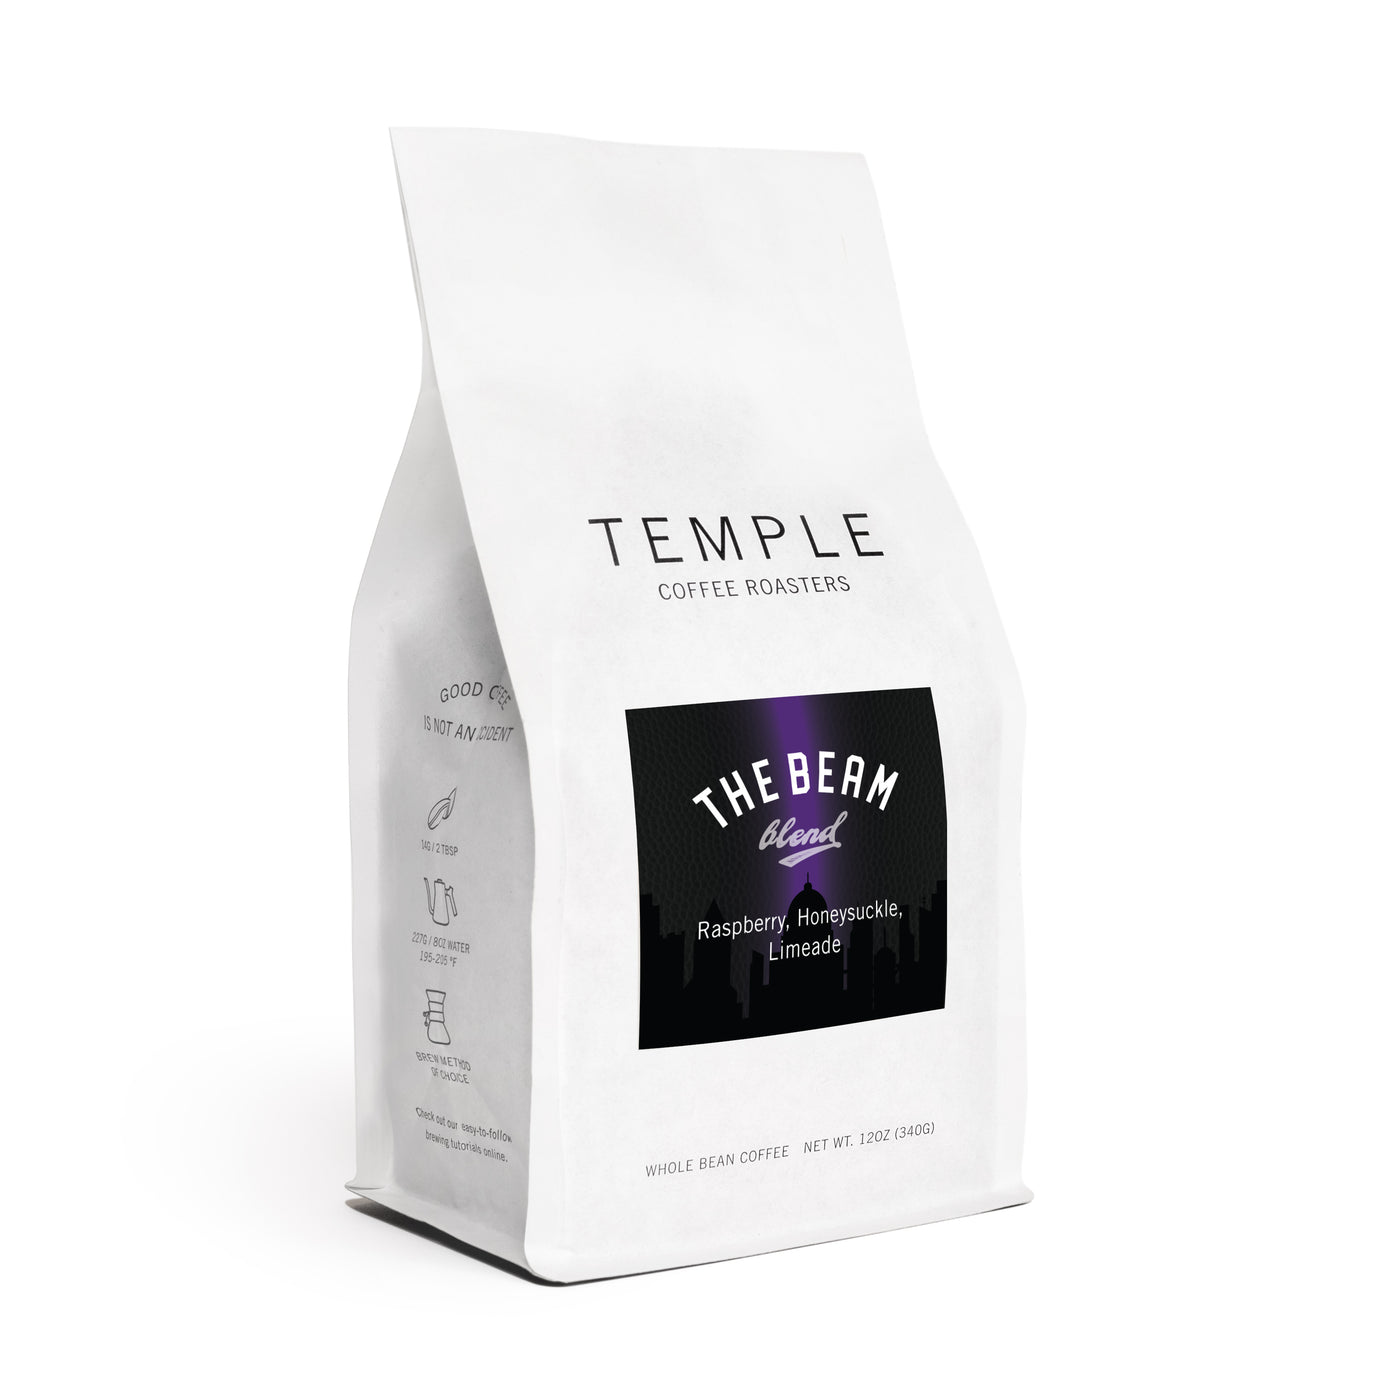 Bag of The Beam Blend coffee